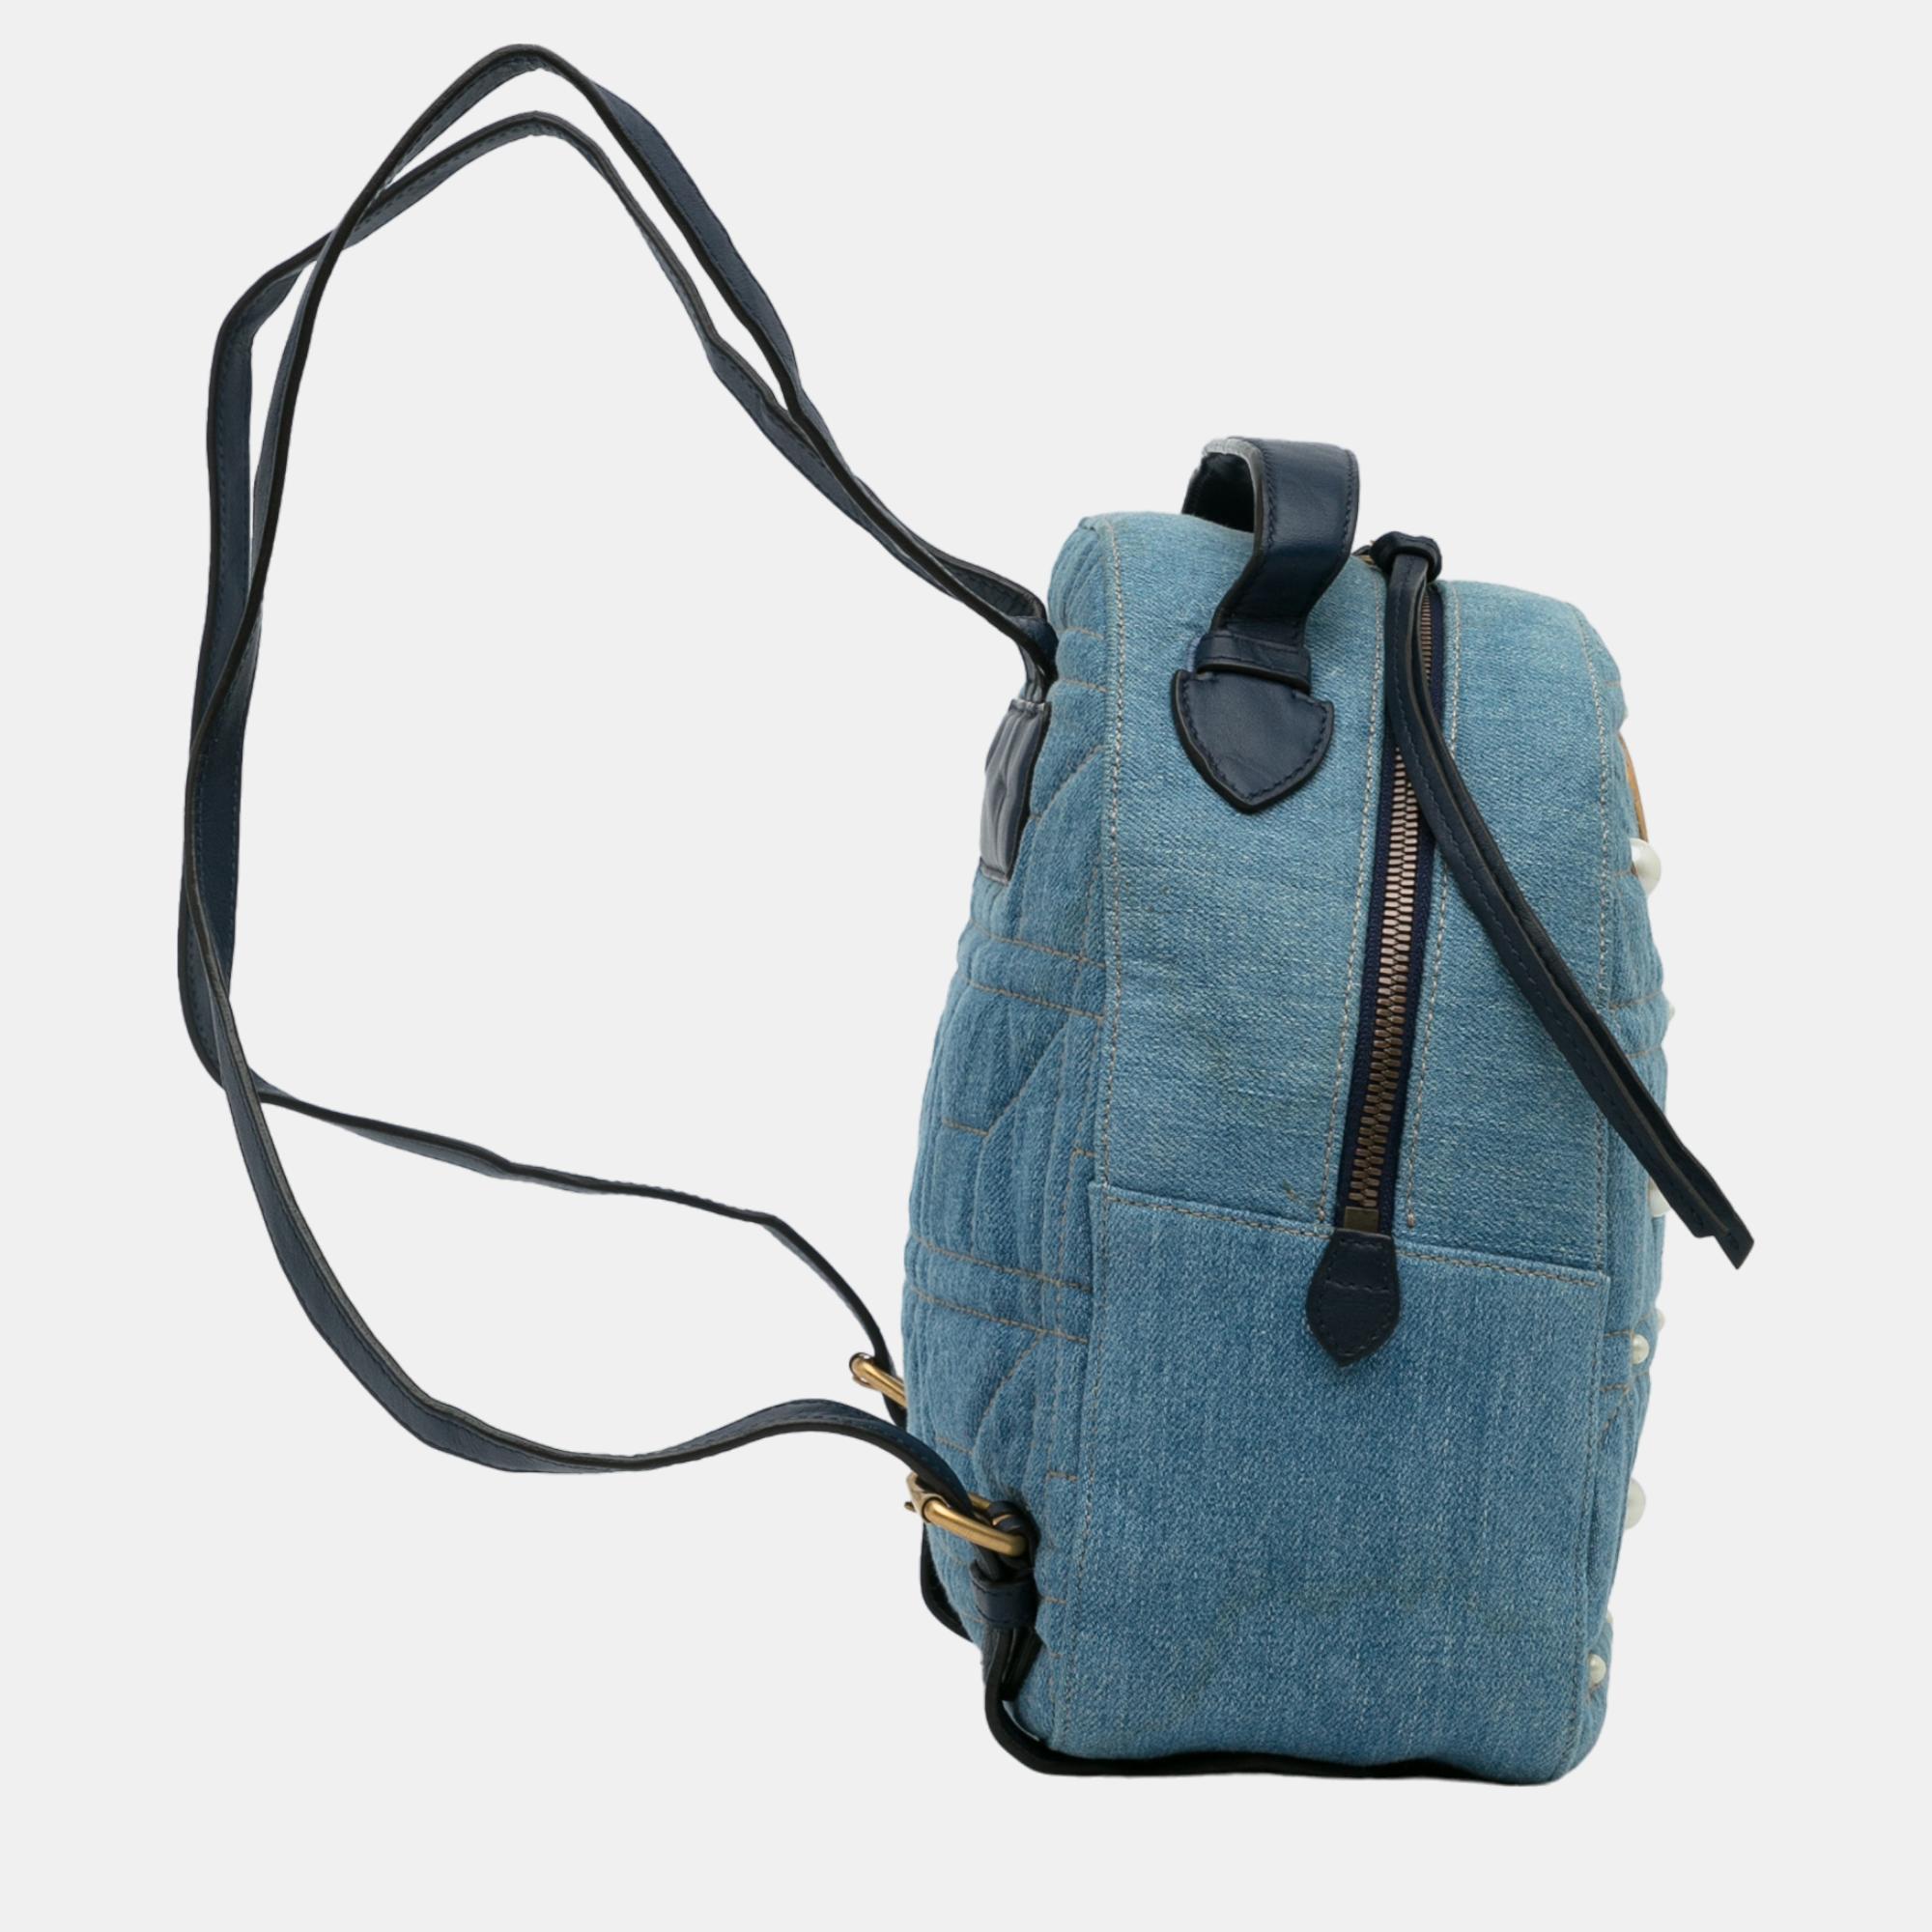 Gucci Blue Small GG Marmont Pearl Denim Backpack